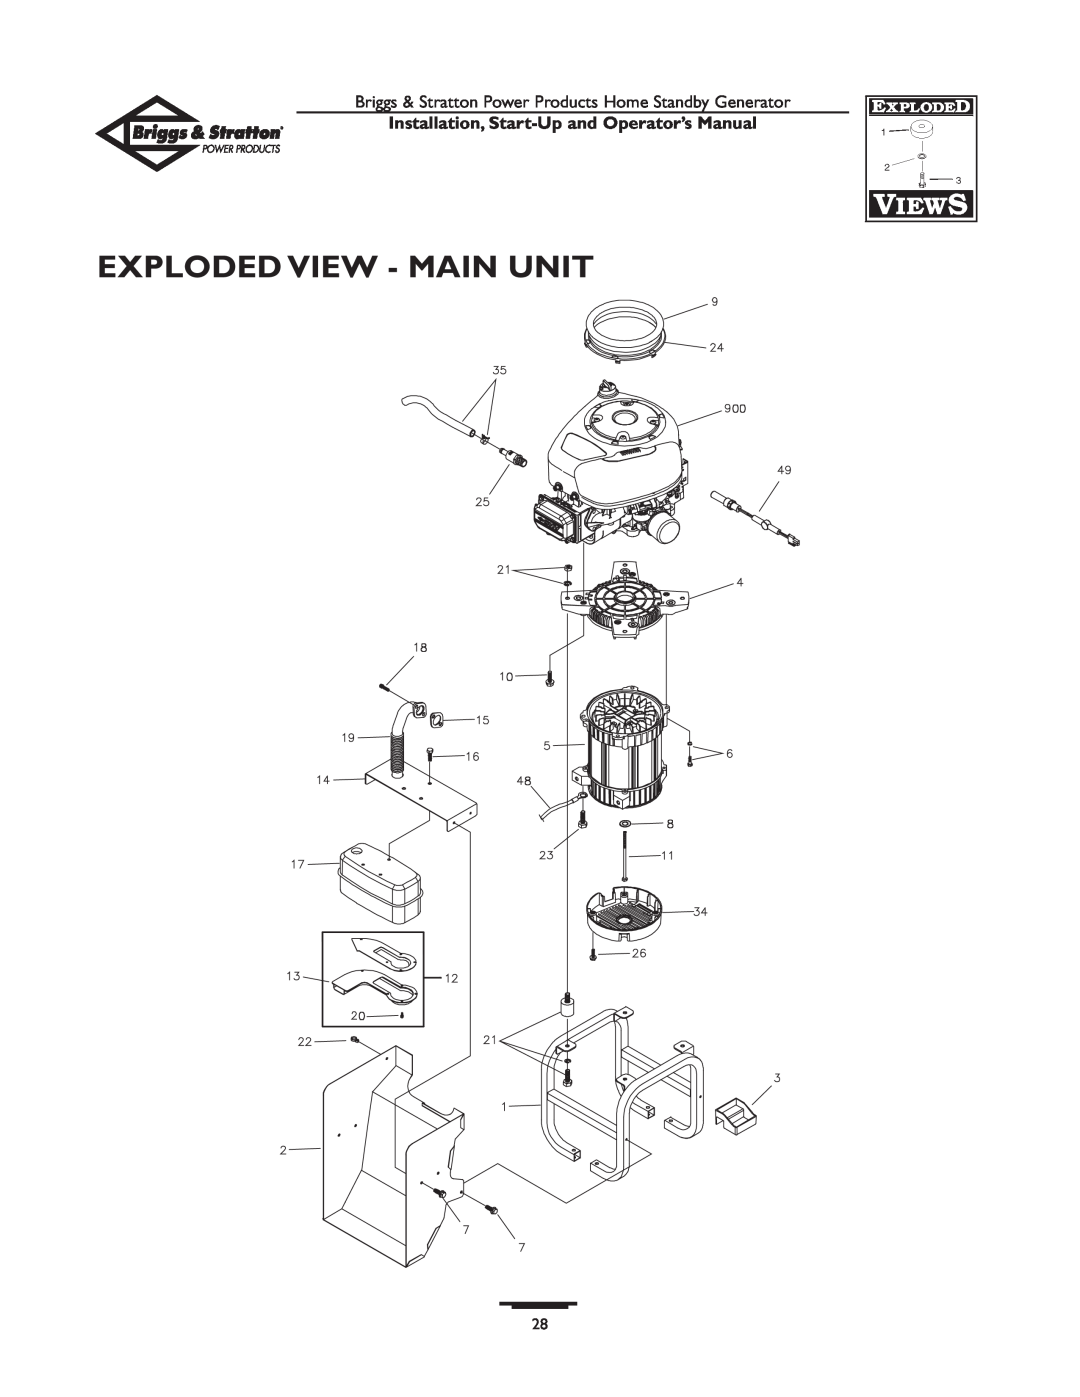 Briggs & Stratton 01897-0 manual Exploded View - Main Unit, Installation, Start-Up and Operator’s Manual 